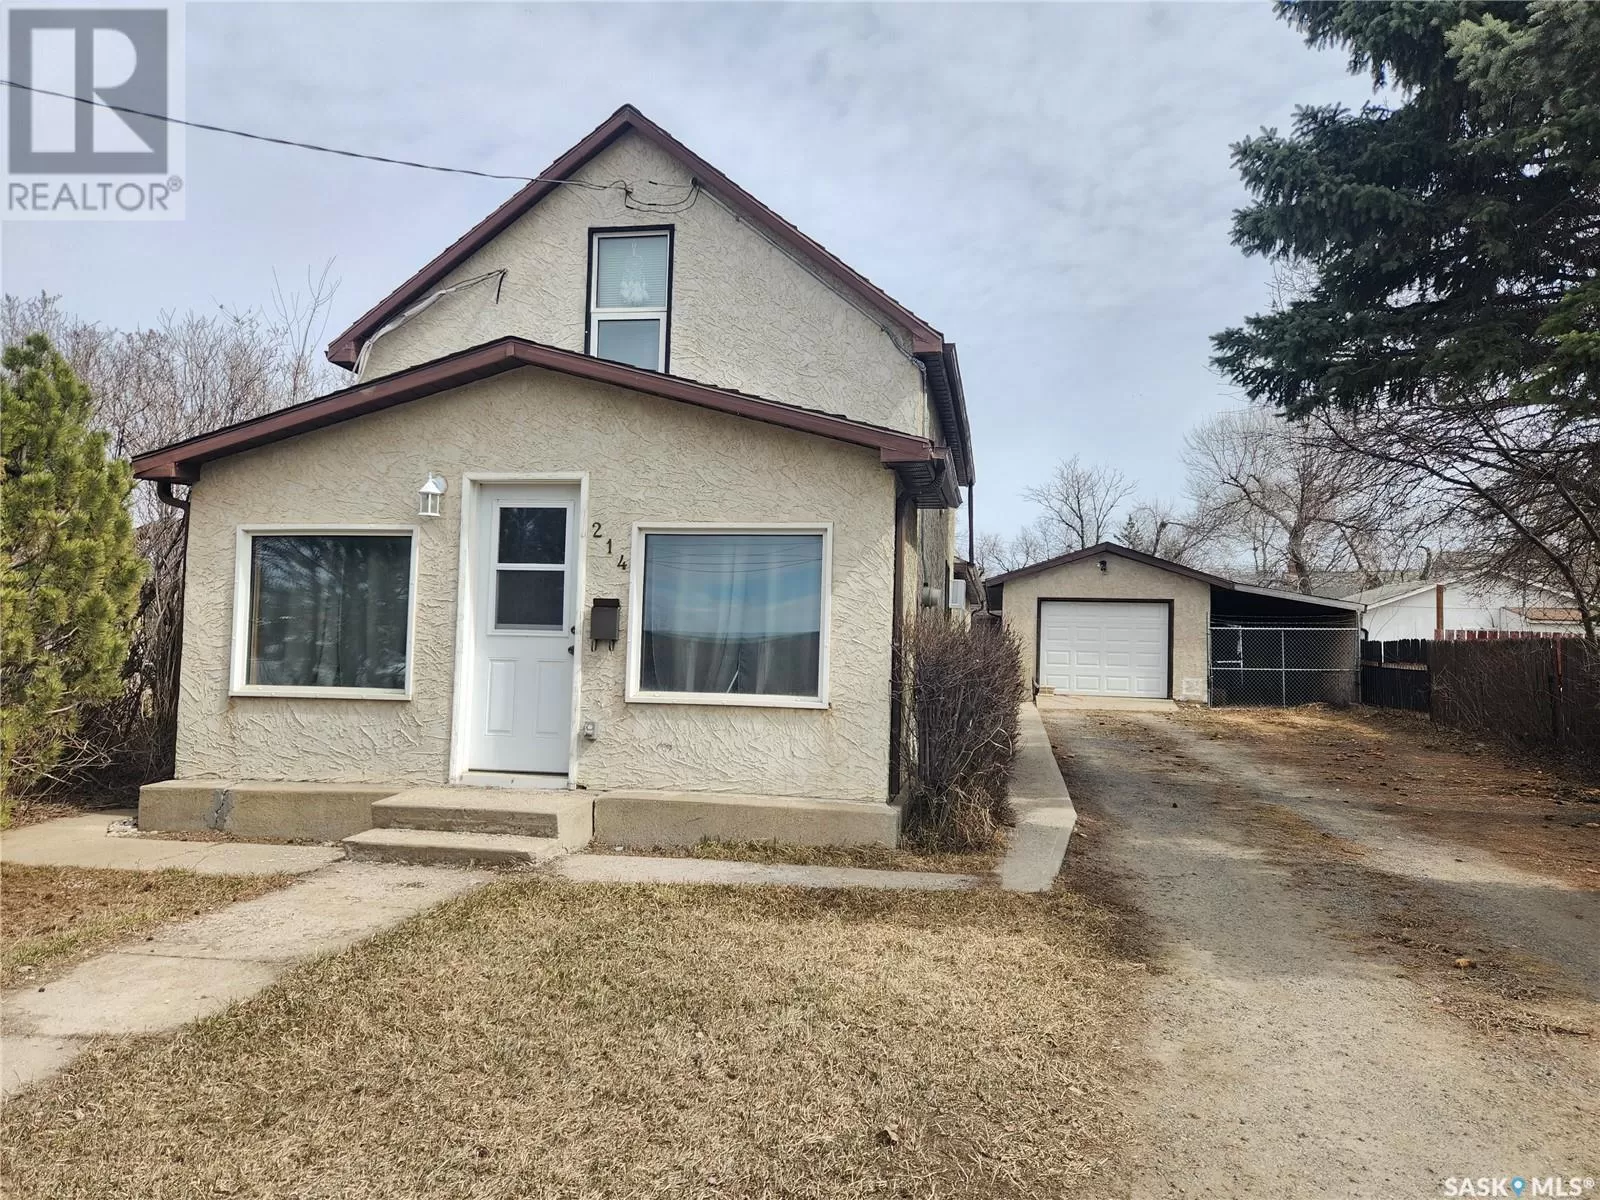 House for rent: 214 Government Road S, Weyburn, Saskatchewan S4H 2A5